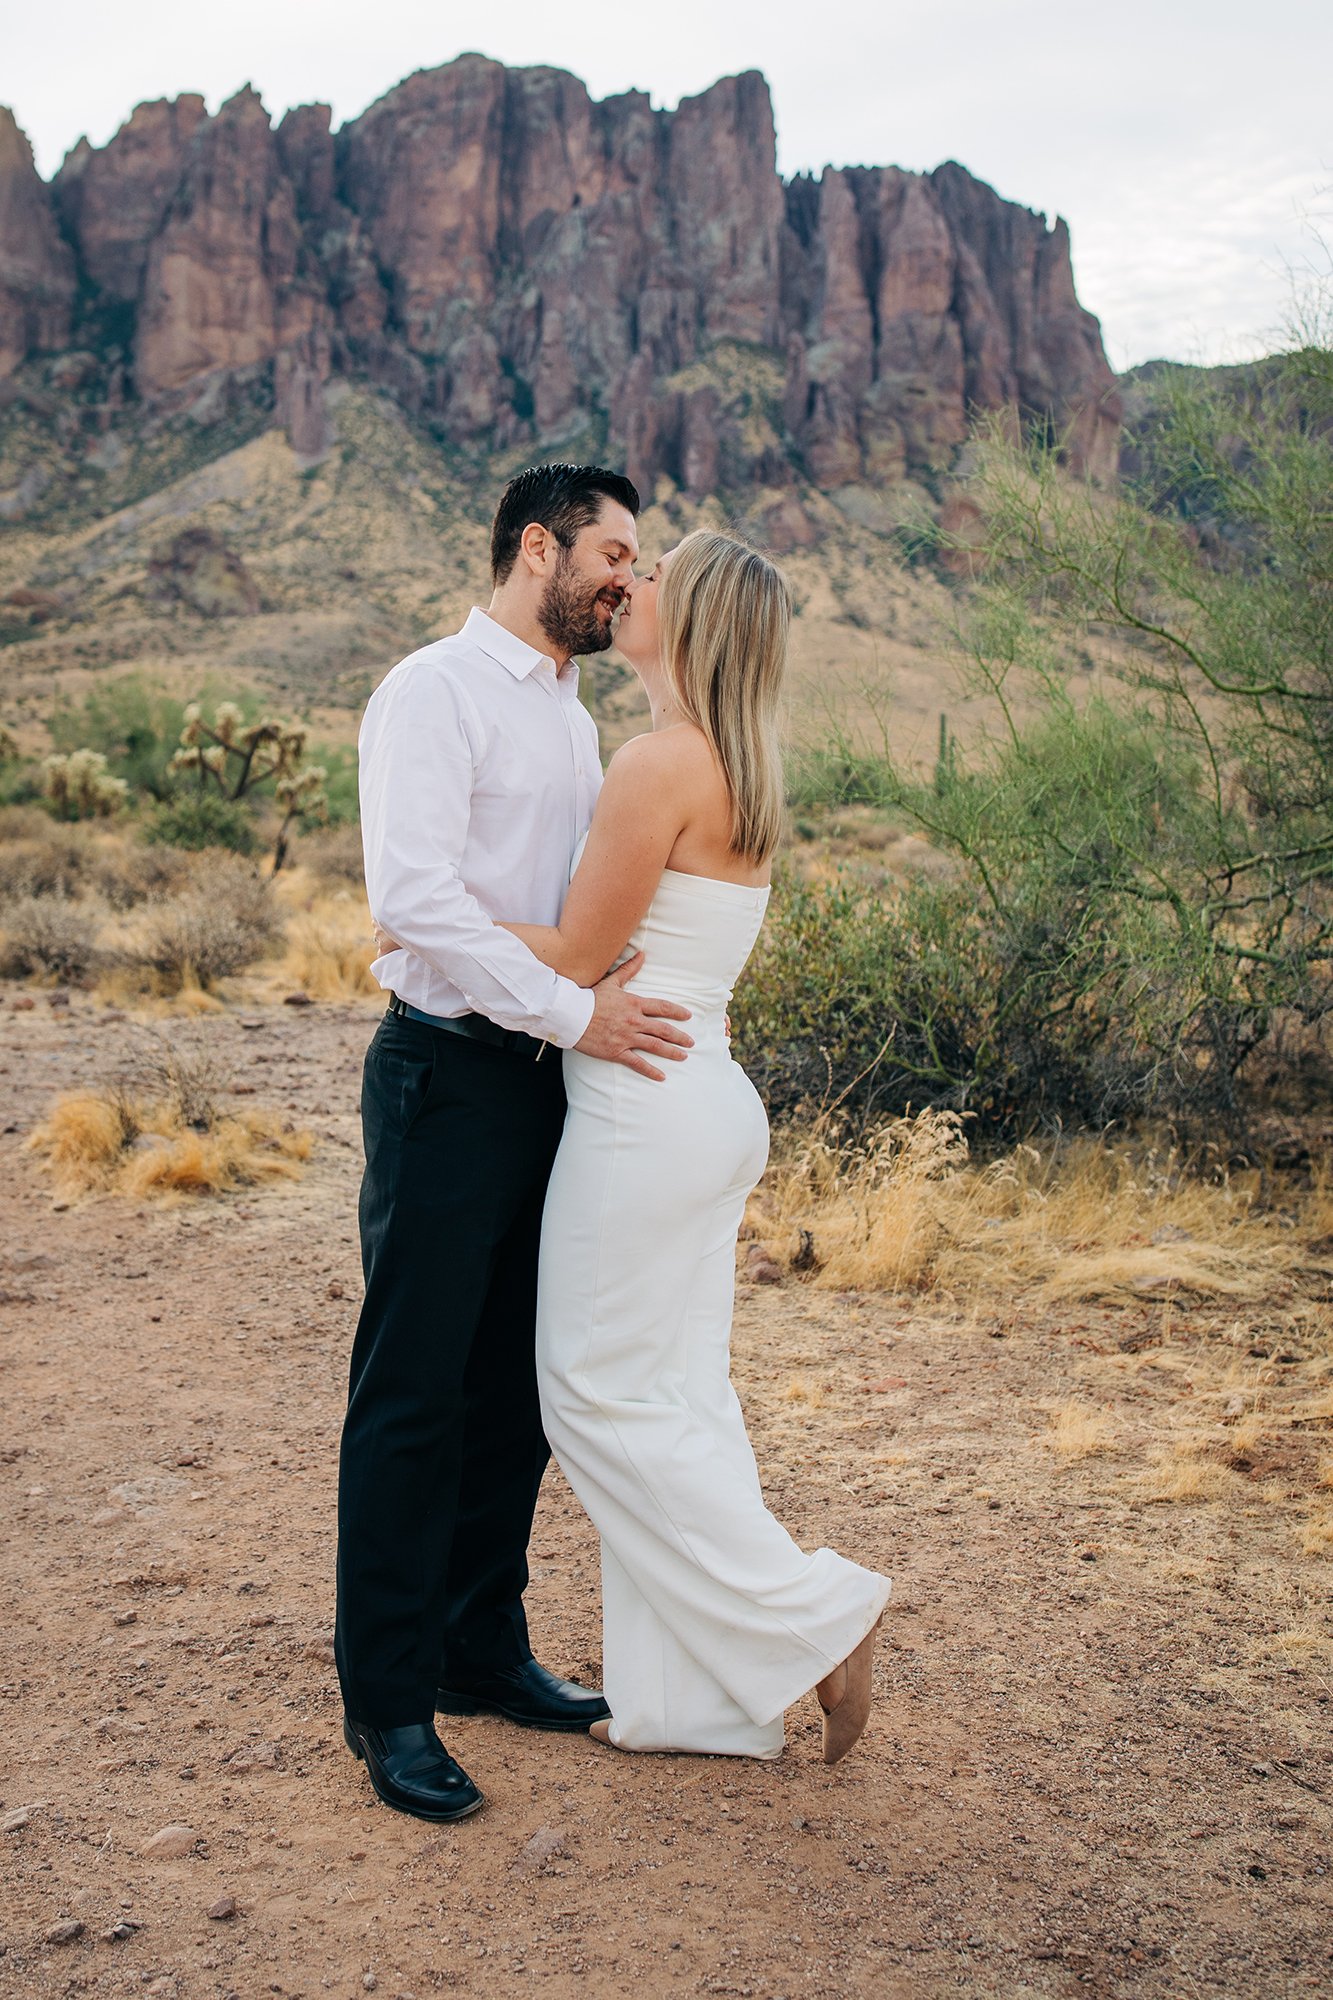 the-joys-of-a-morning-elopement-an-intimate-wedding-in-the-arizona-desert-9.jpg